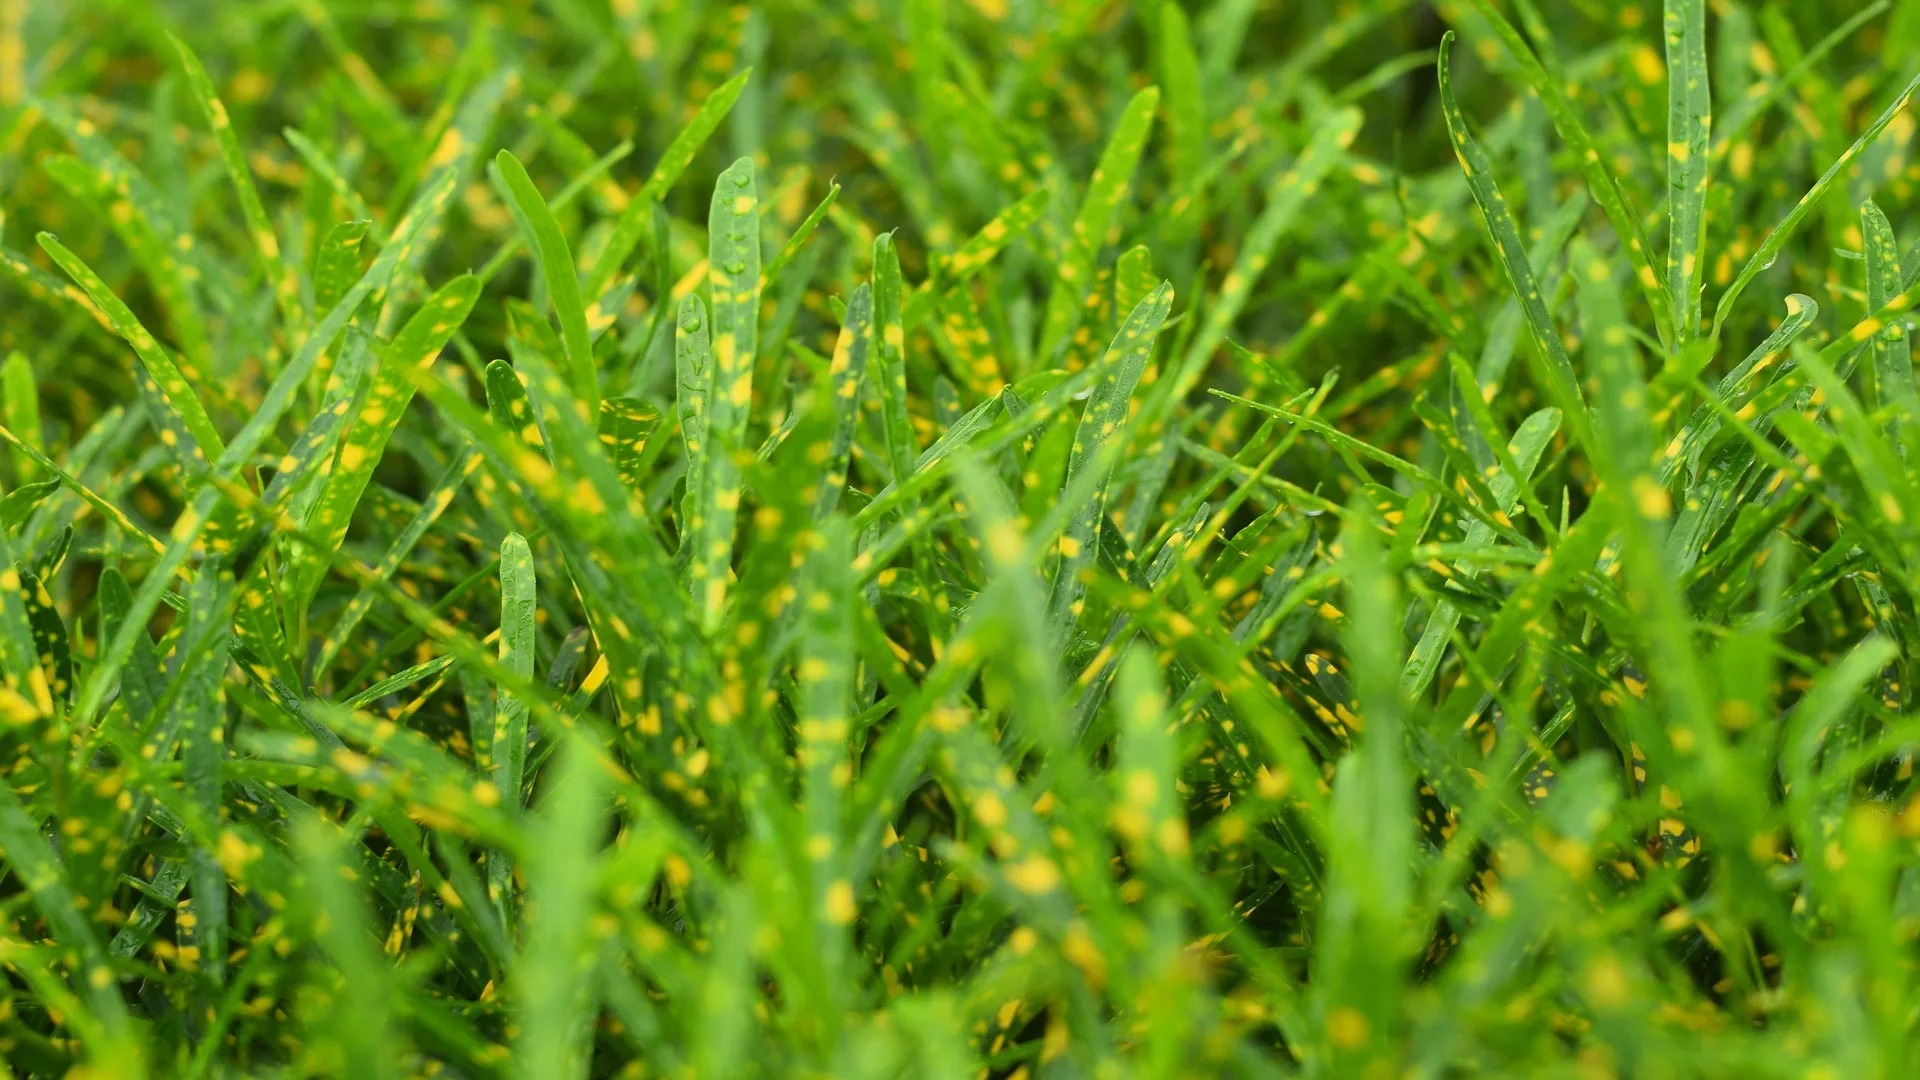 Has Leaf Spot Invaded Your Turf? Here’s How to Deal With This Lawn Disease!